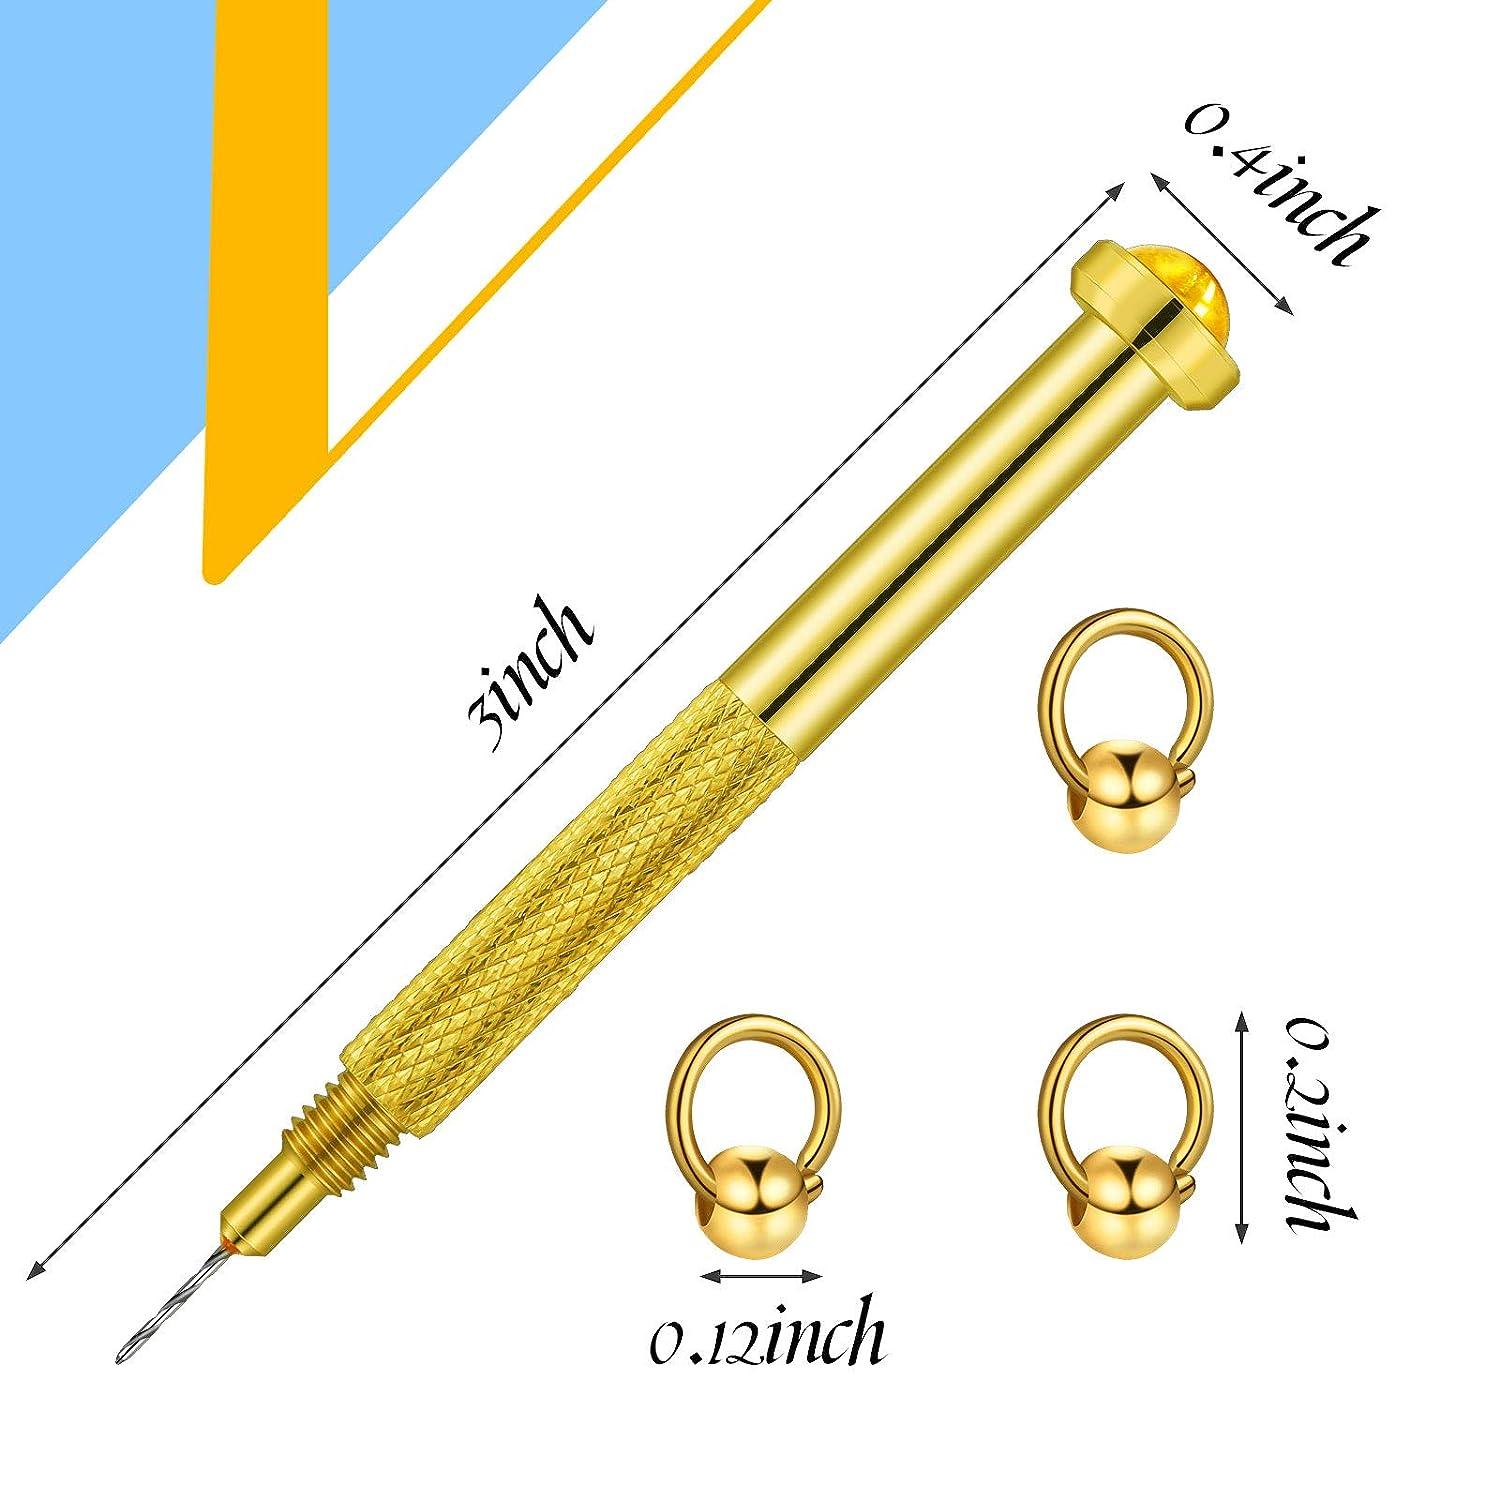 Manual Nail Piercing Dangle Charms Hand Drill Tool, Dangling Nails Art  Jewelry Acrylic Charm, Professional Jewellery Makeover Design Accessories